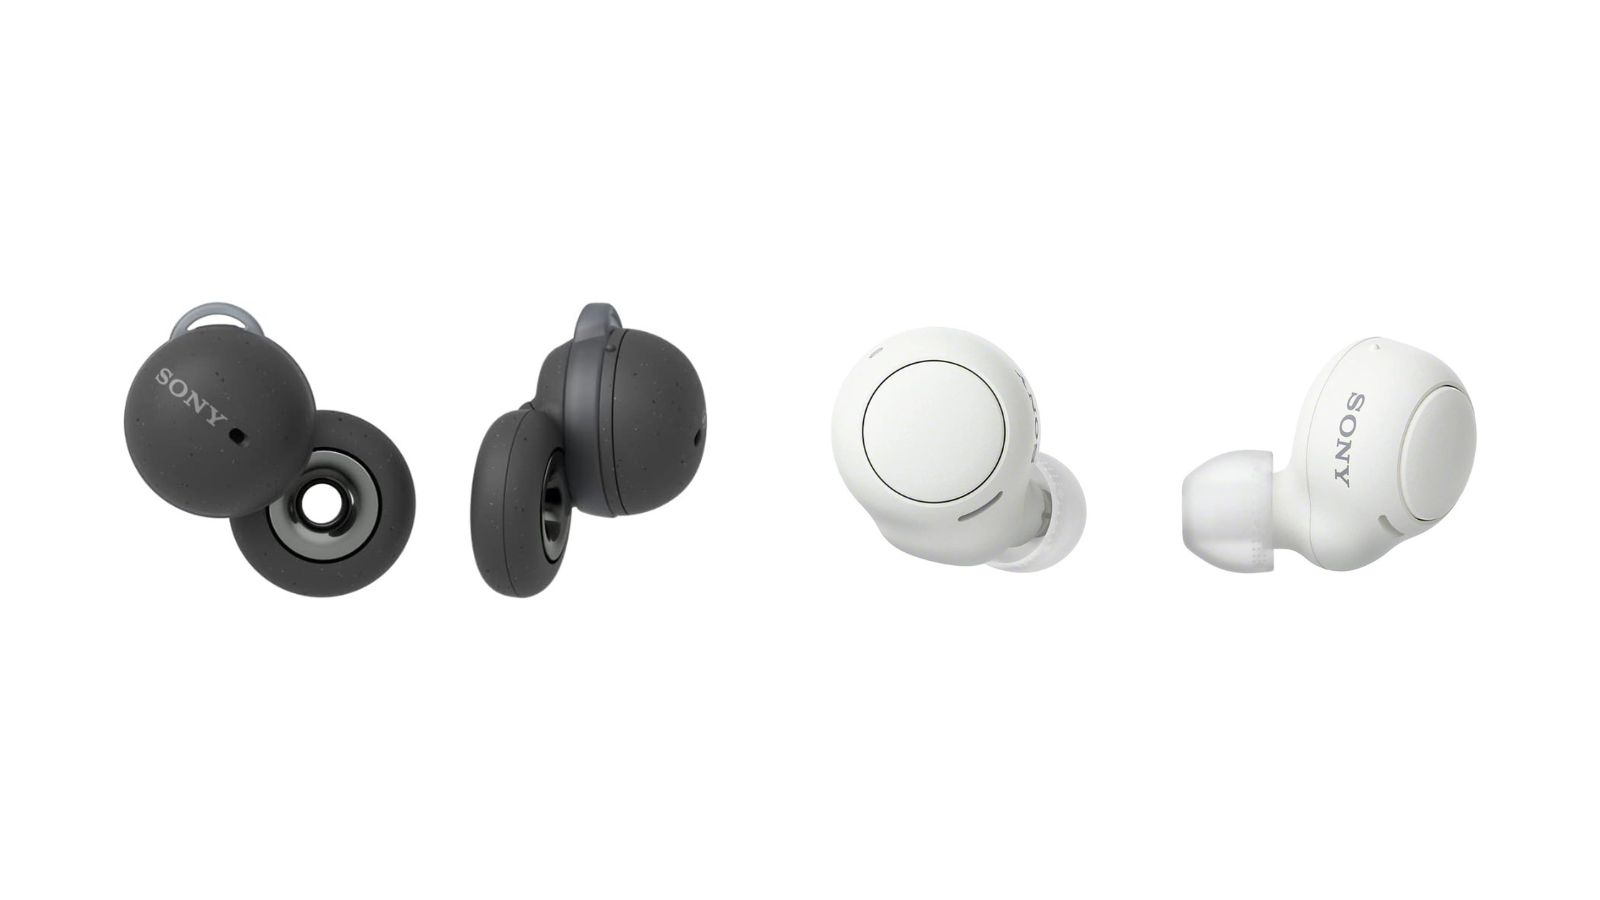 The new Sony LinkBuds S earbuds are pricey, but they might be worth it